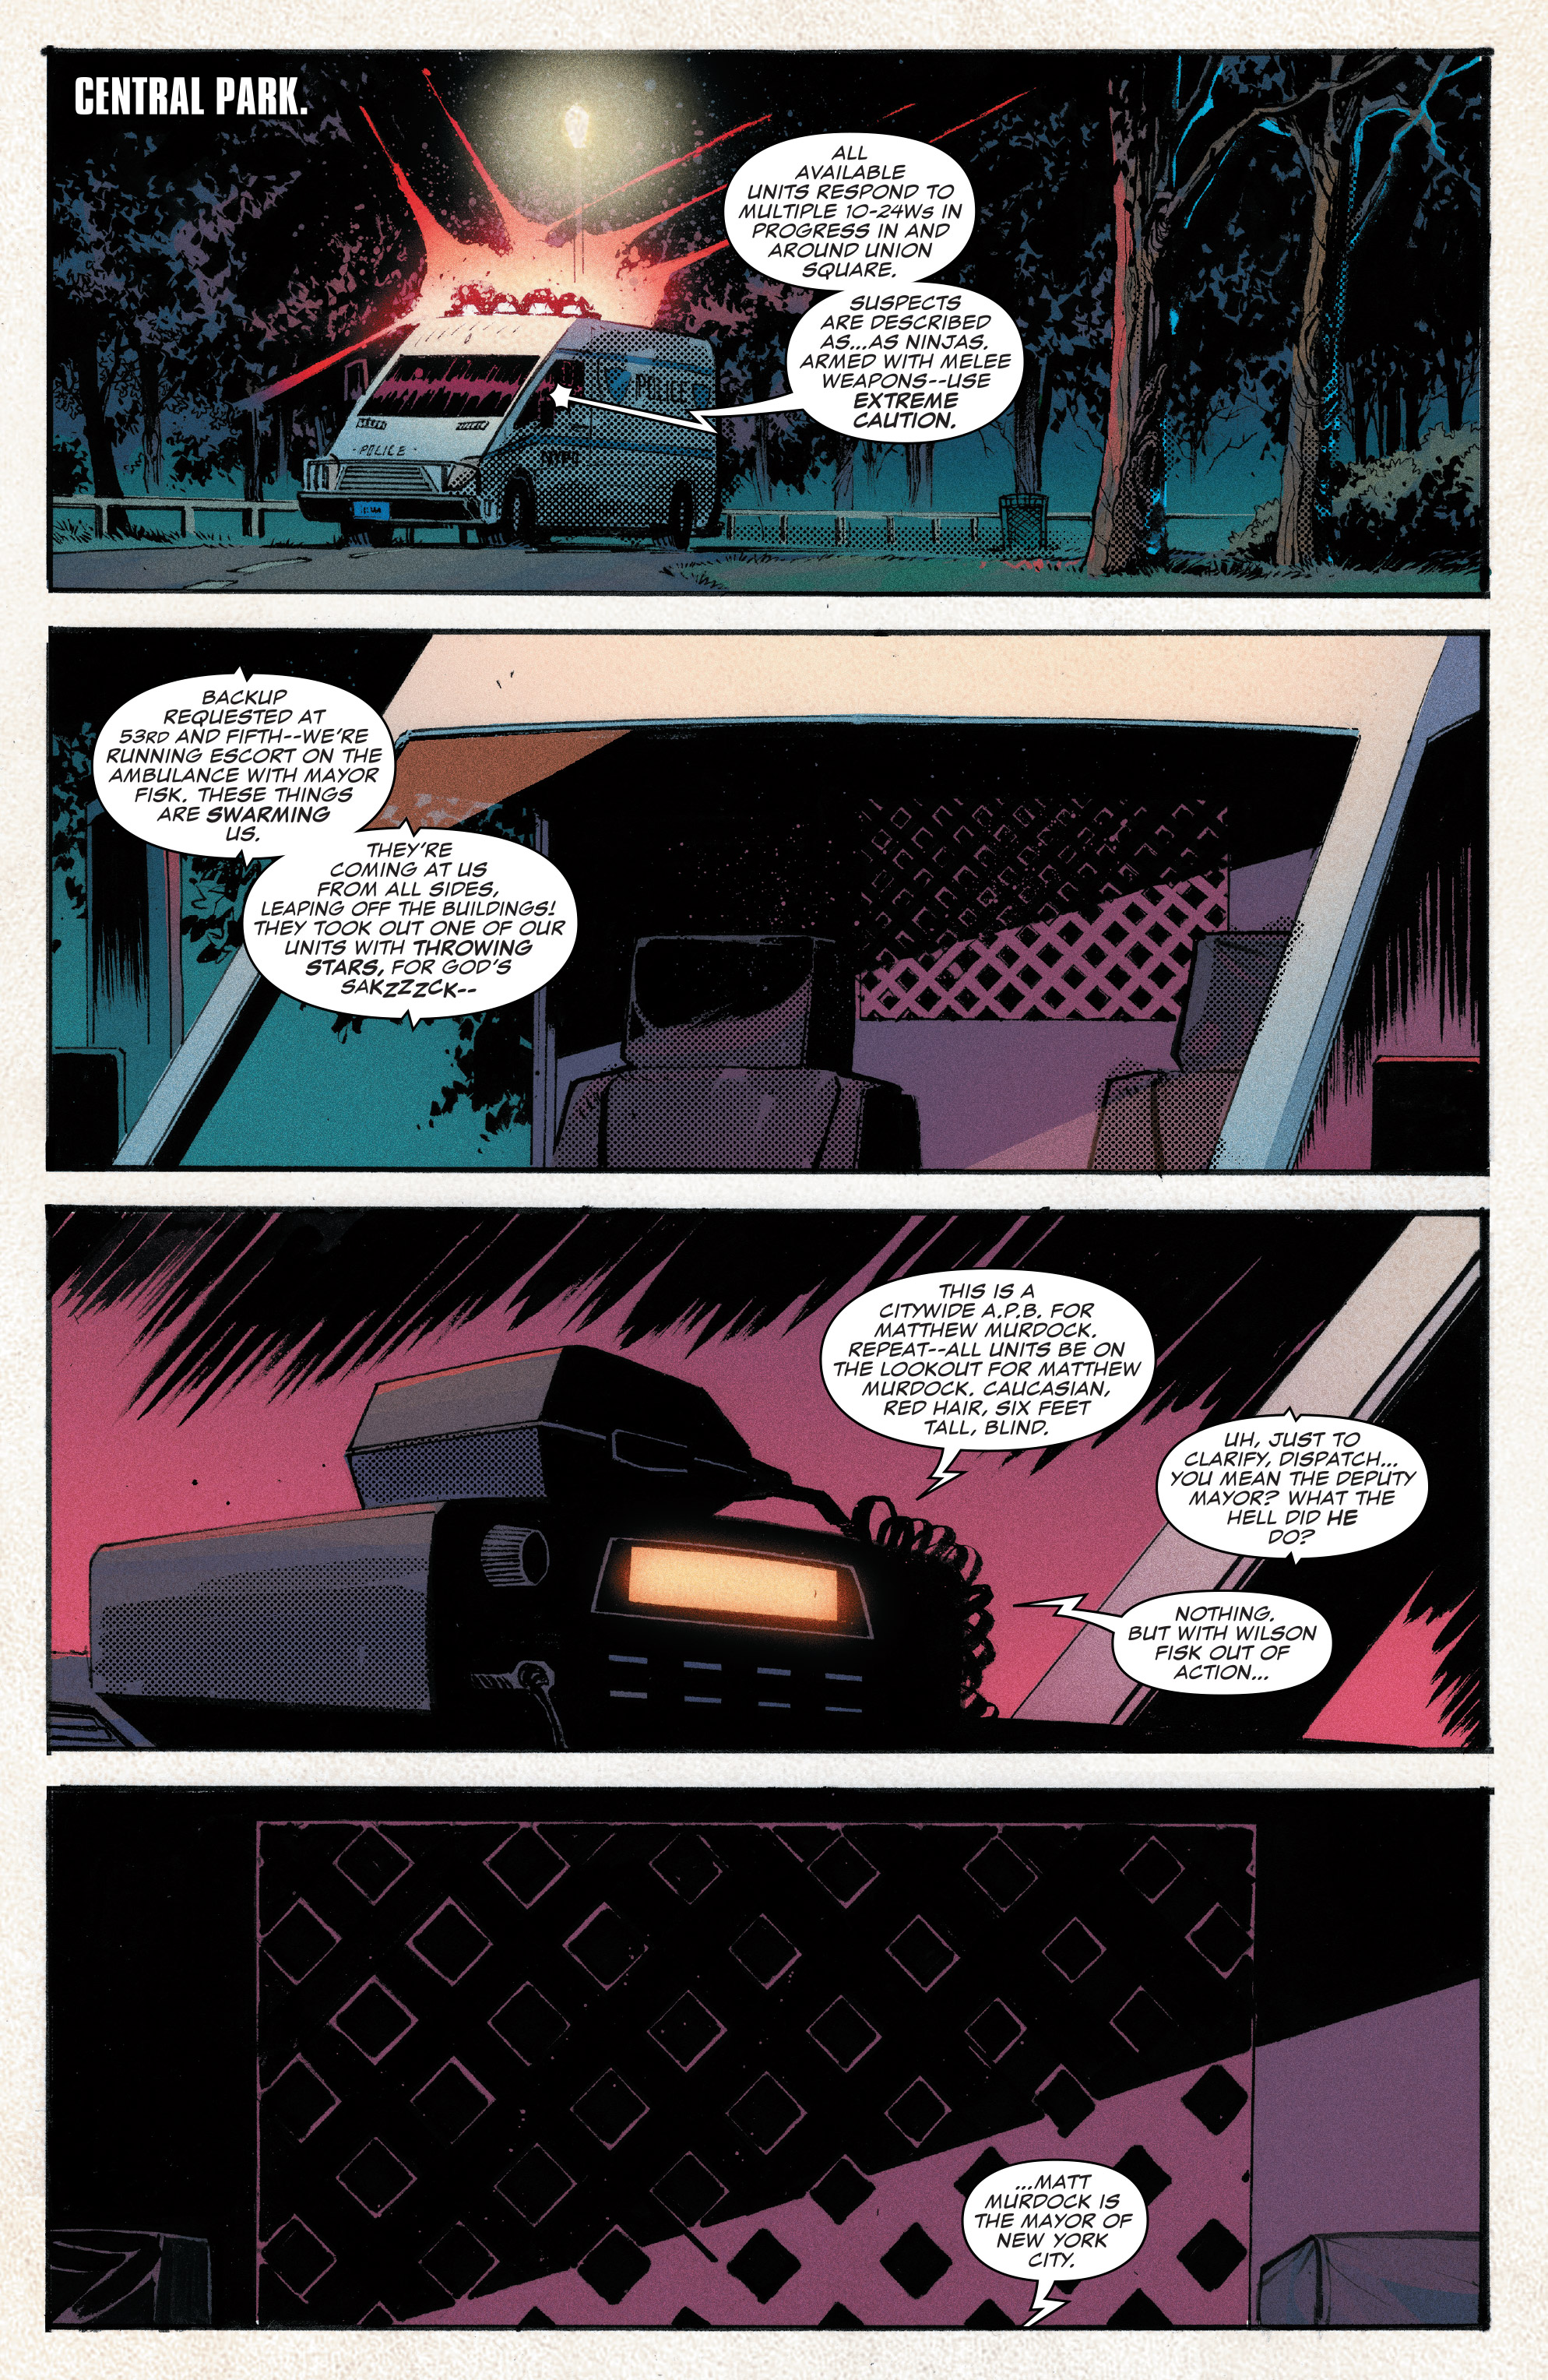 Daredevil (2016-): Chapter 601 - Page 3